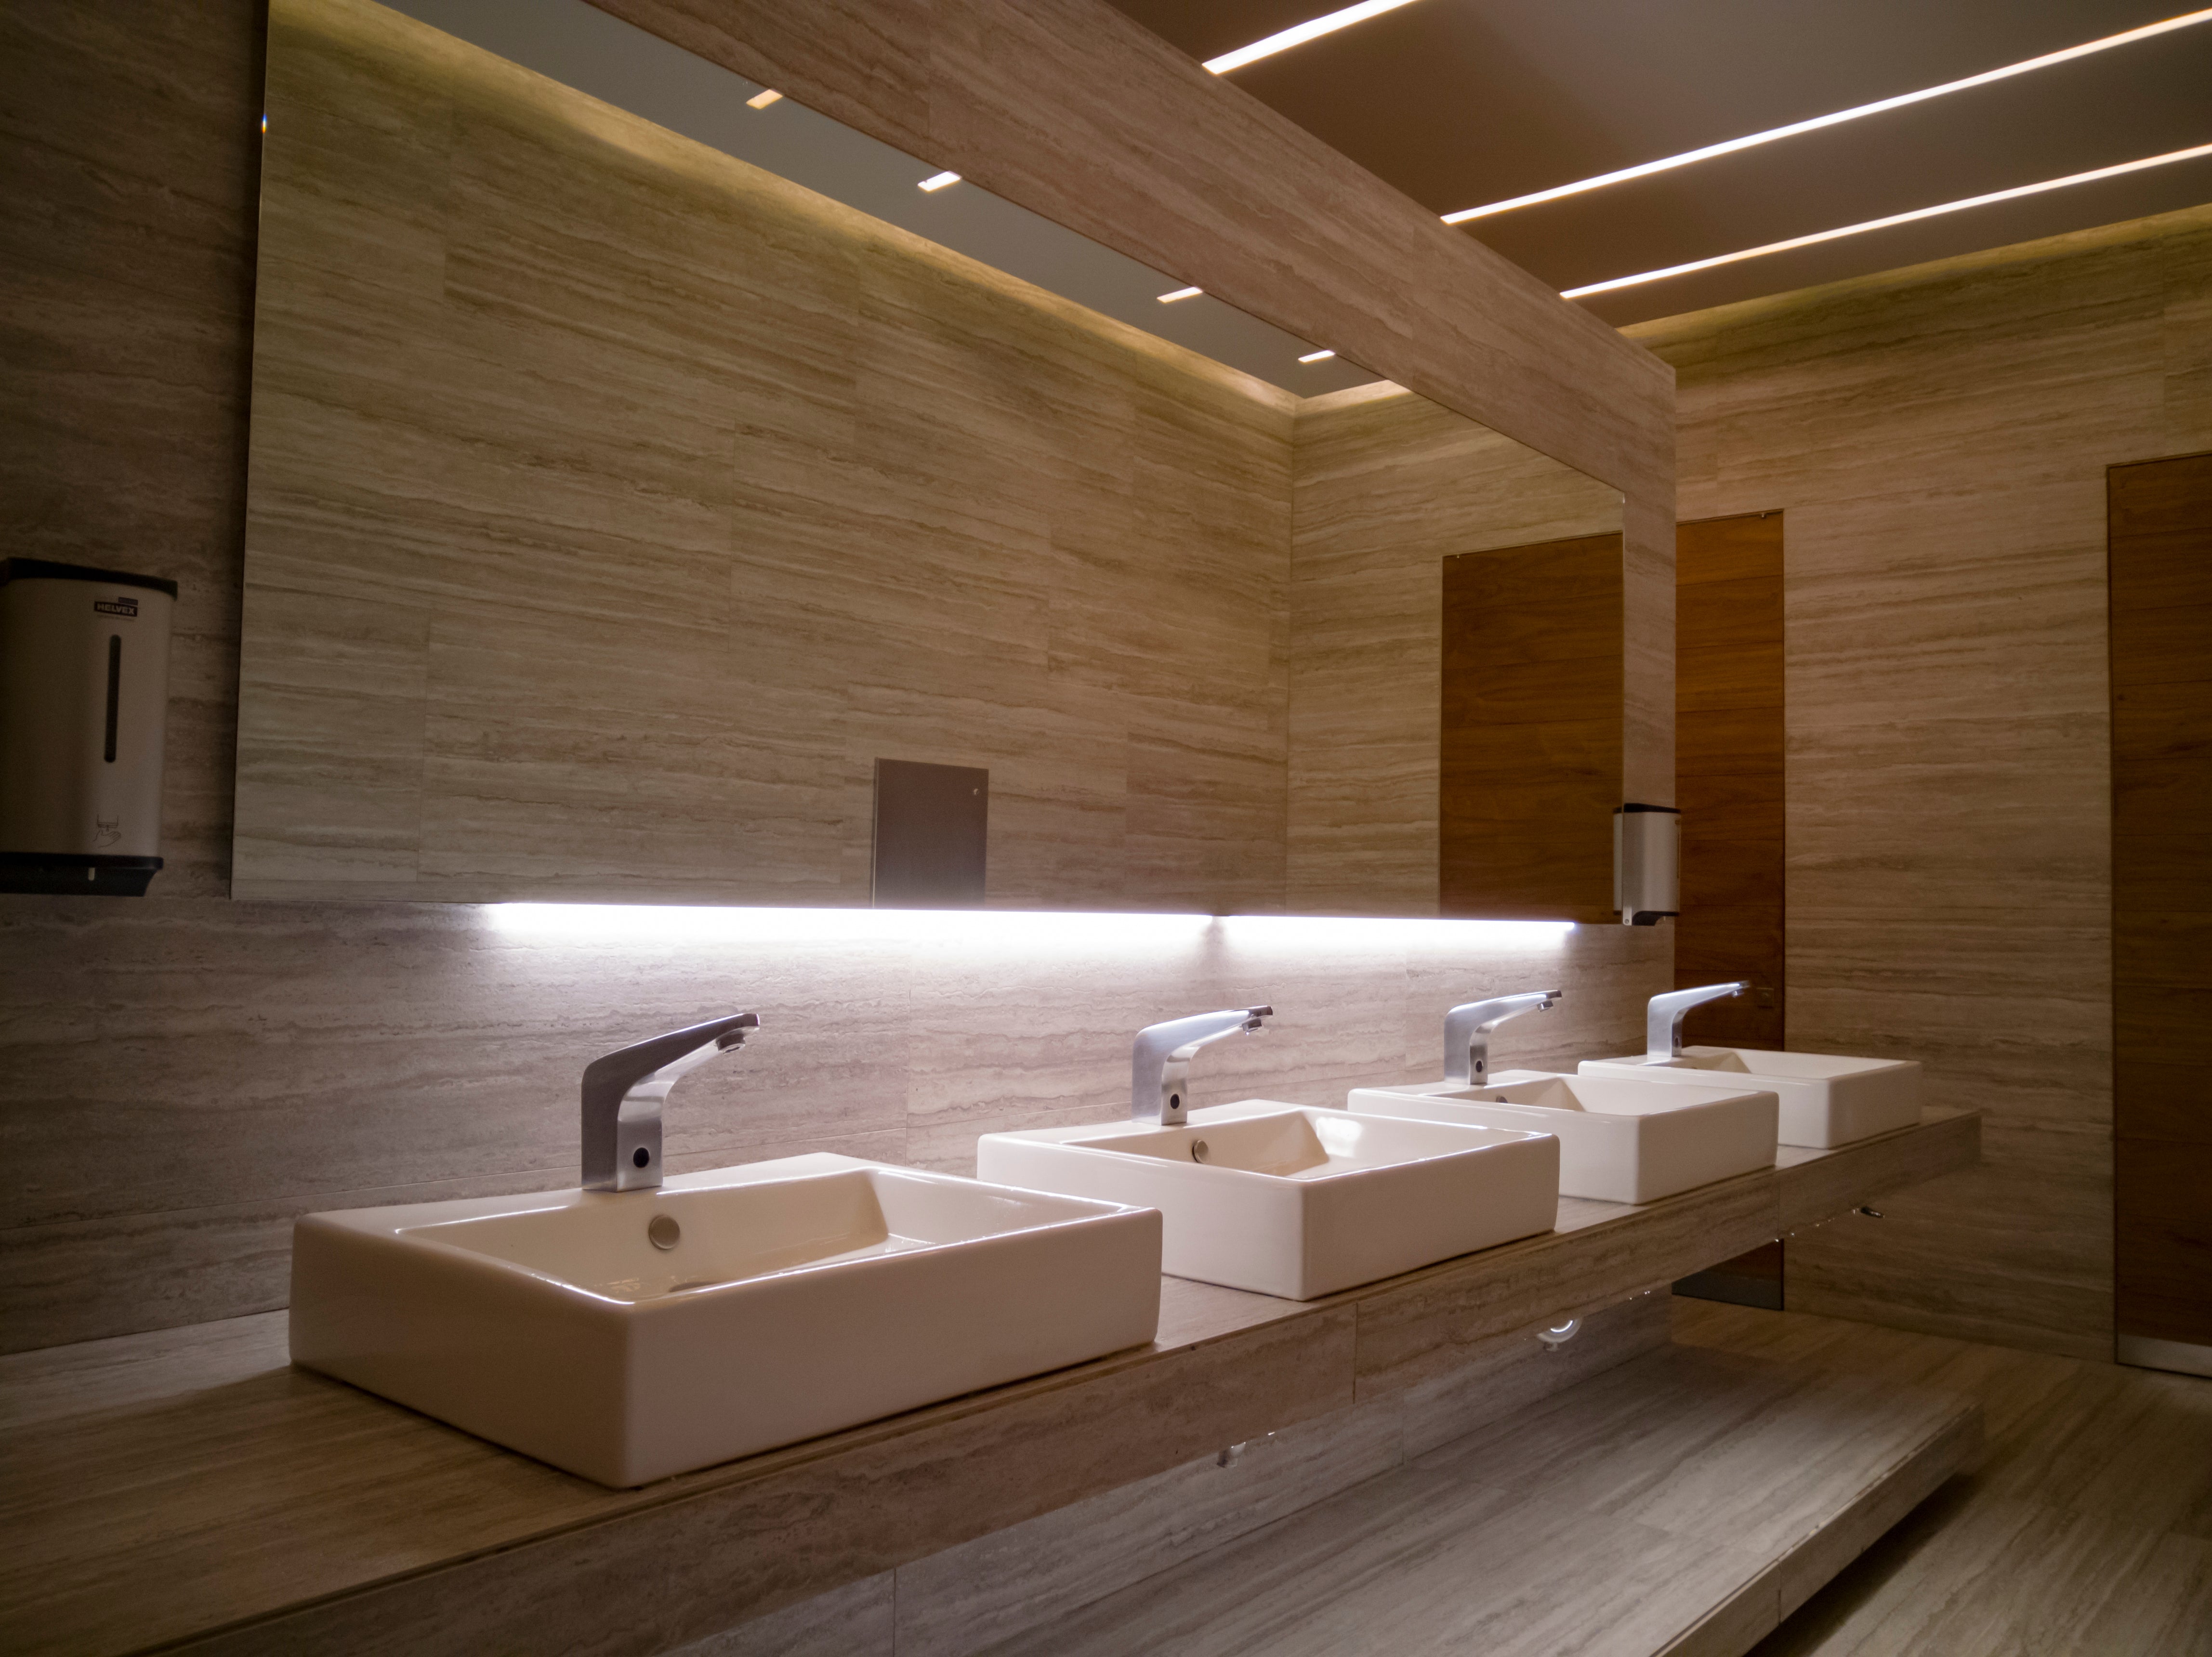 How to Choose the Best LED Lights for Your Bathroom